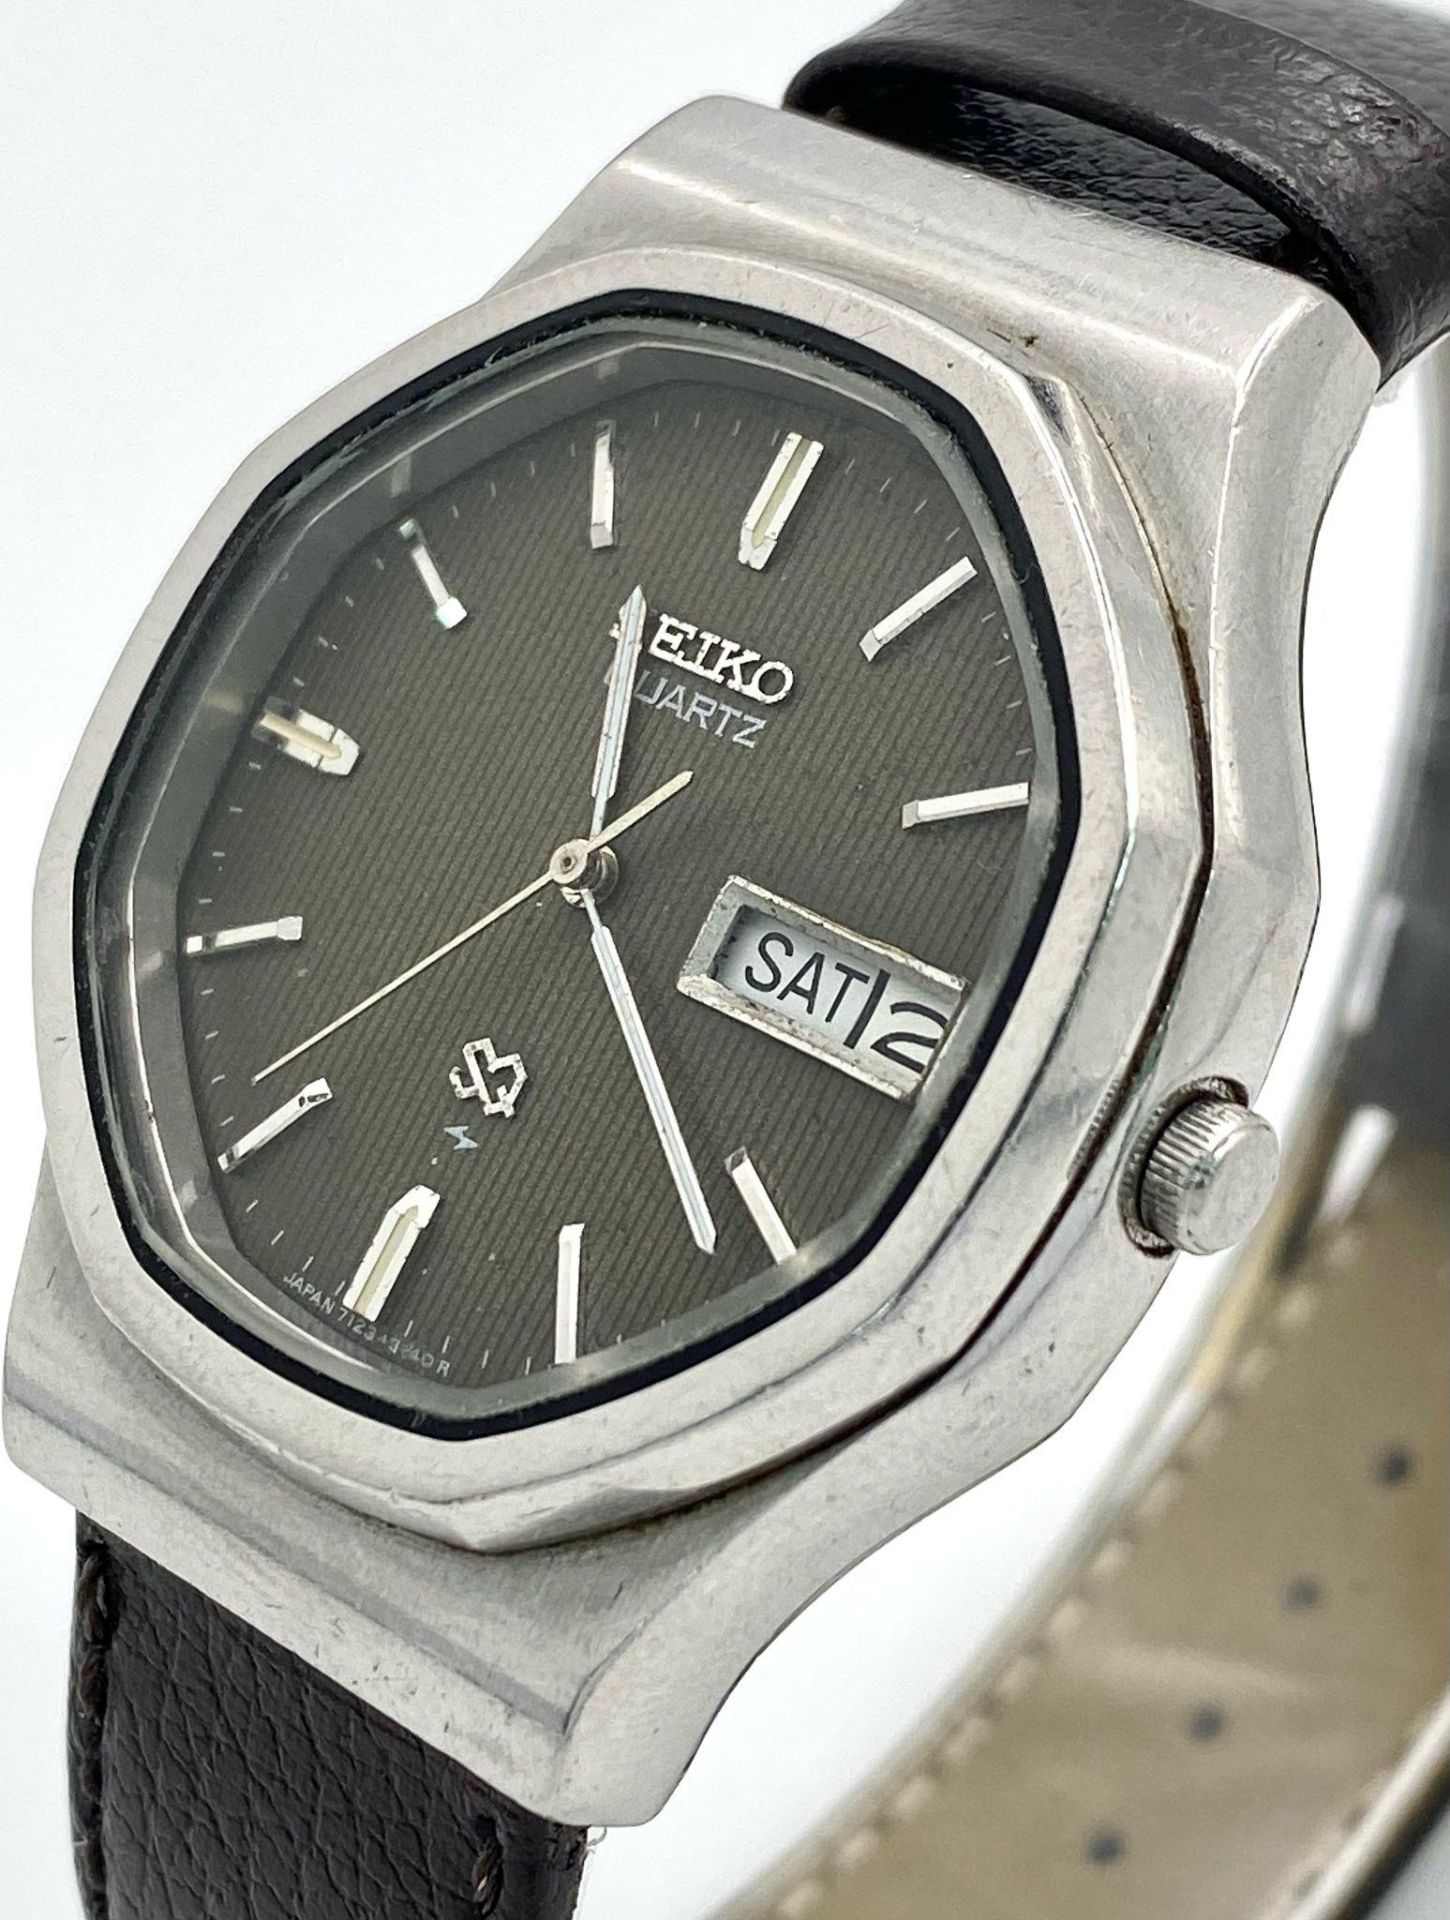 A Vintage Seiko Quartz Watch. Black leather strap. Octagonal case - 36mm. Grey dial with day/date - Image 4 of 7